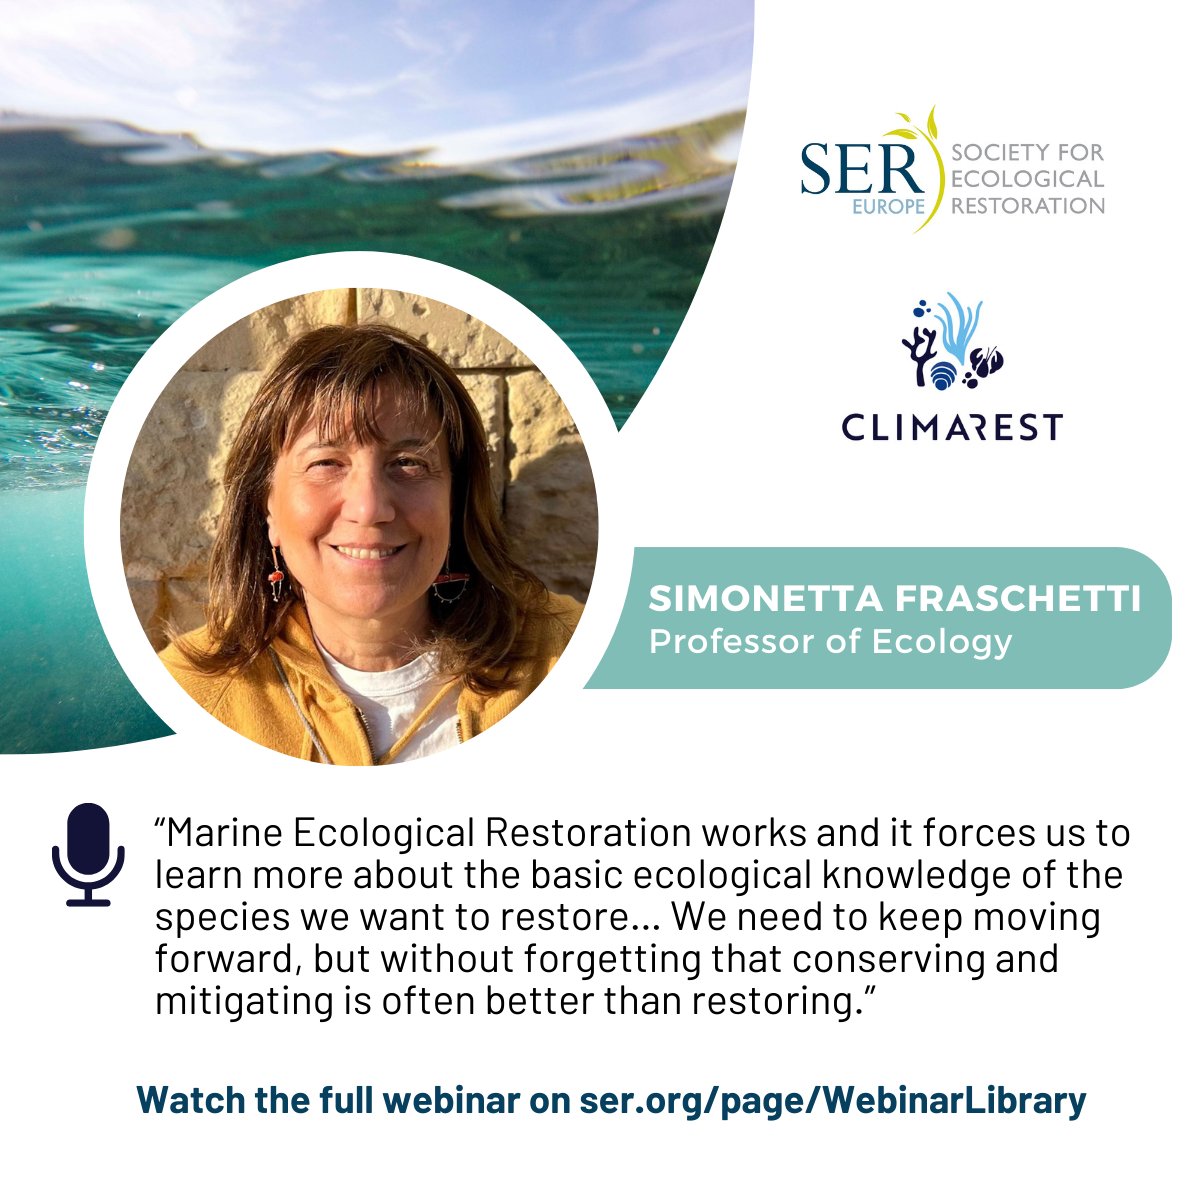 🔦 Shedding light on the #MarineRestoration Expert Panel of the 1st SER Europe and @climarest webinar (1/6) Prof. @simfrasca's research focuses on quantifying biodiversity shifts amidst various stressors. Watch the webinar recording: ser.org/news/670562/Op… #SERWebinar